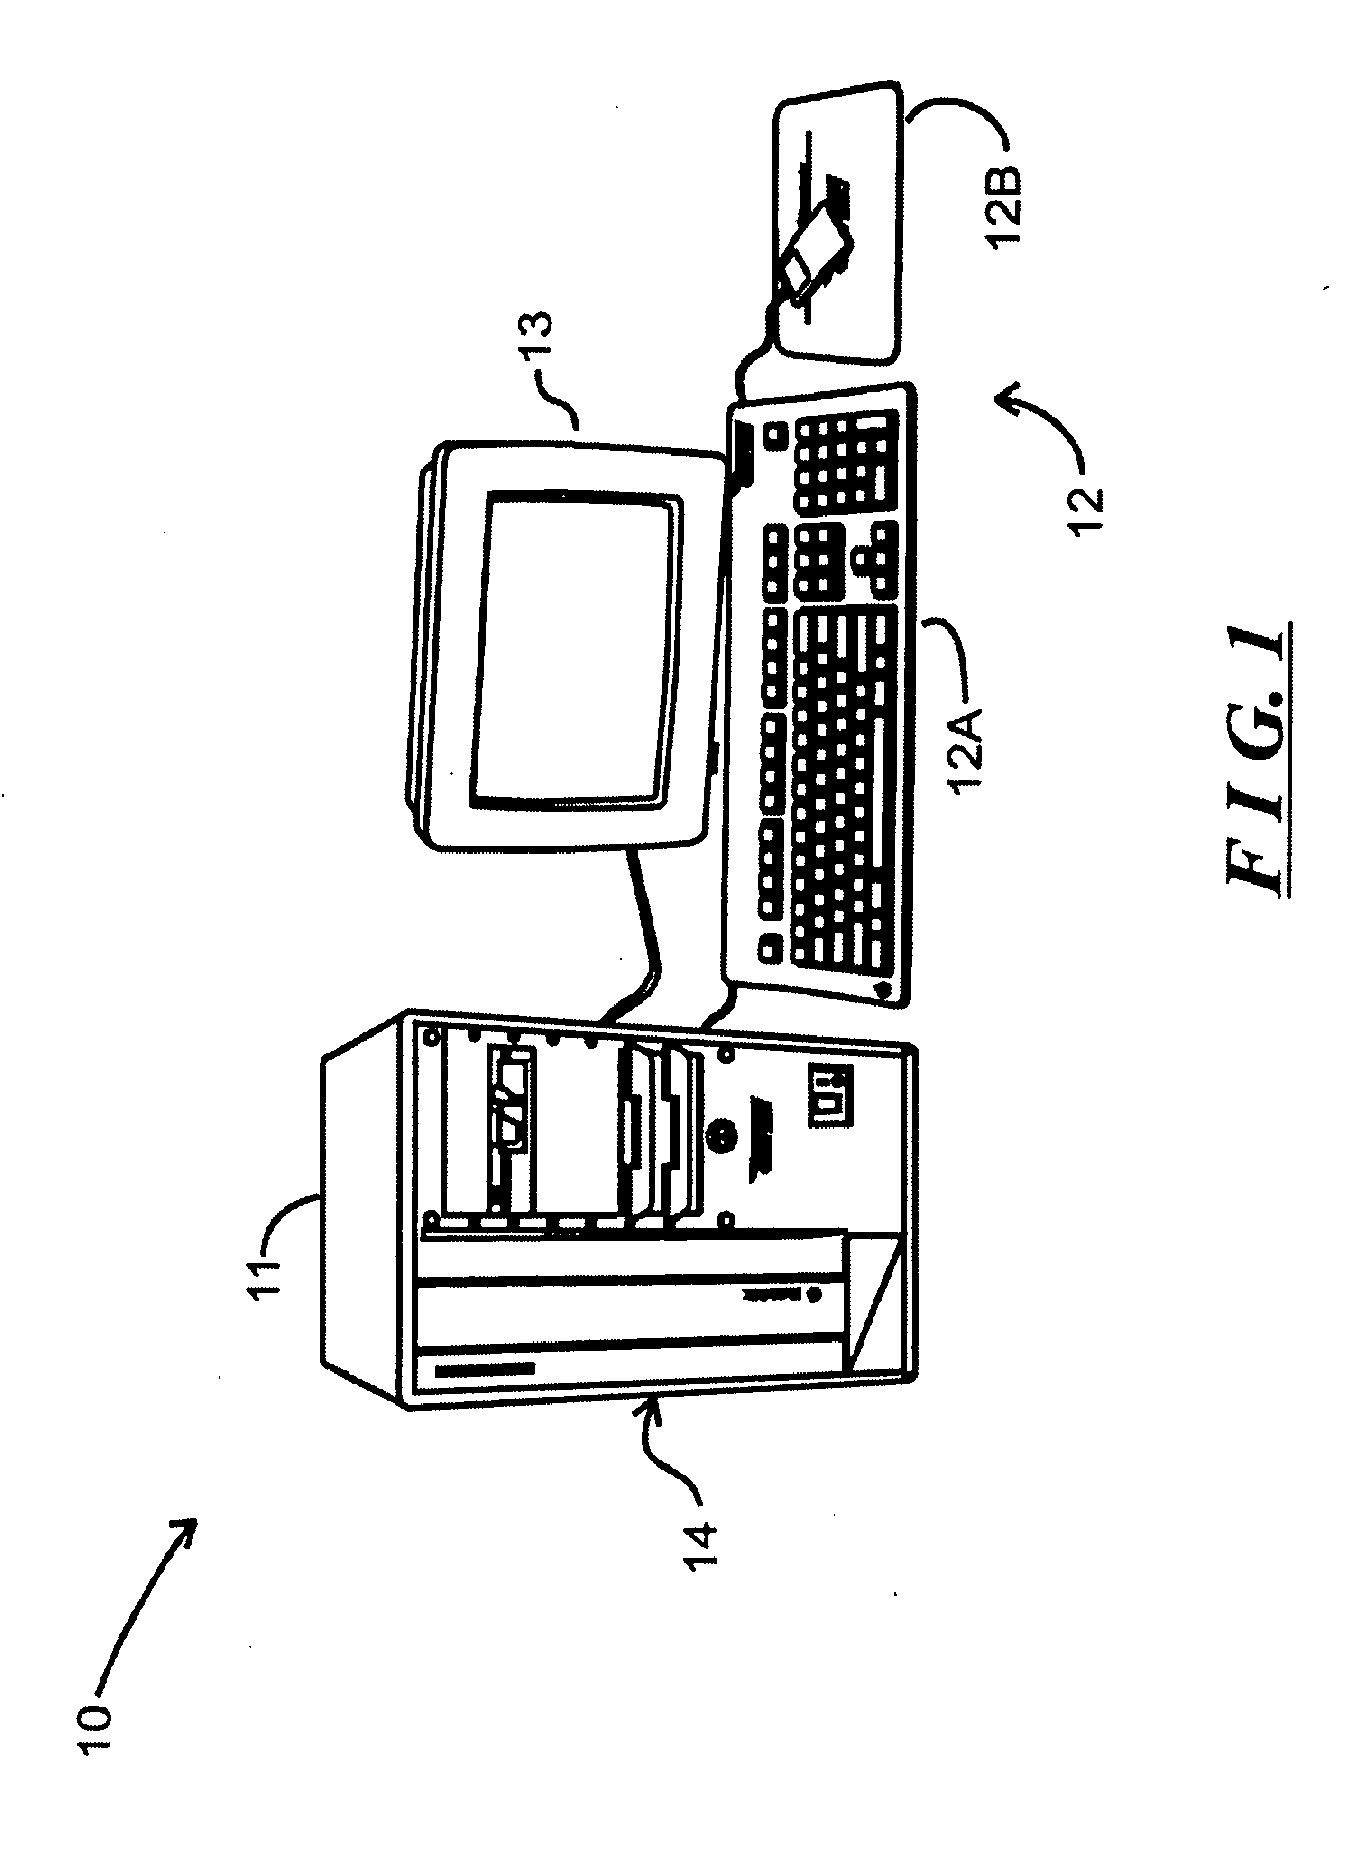 Computer graphics systems and methods for encoding subdivision triangular surfaces